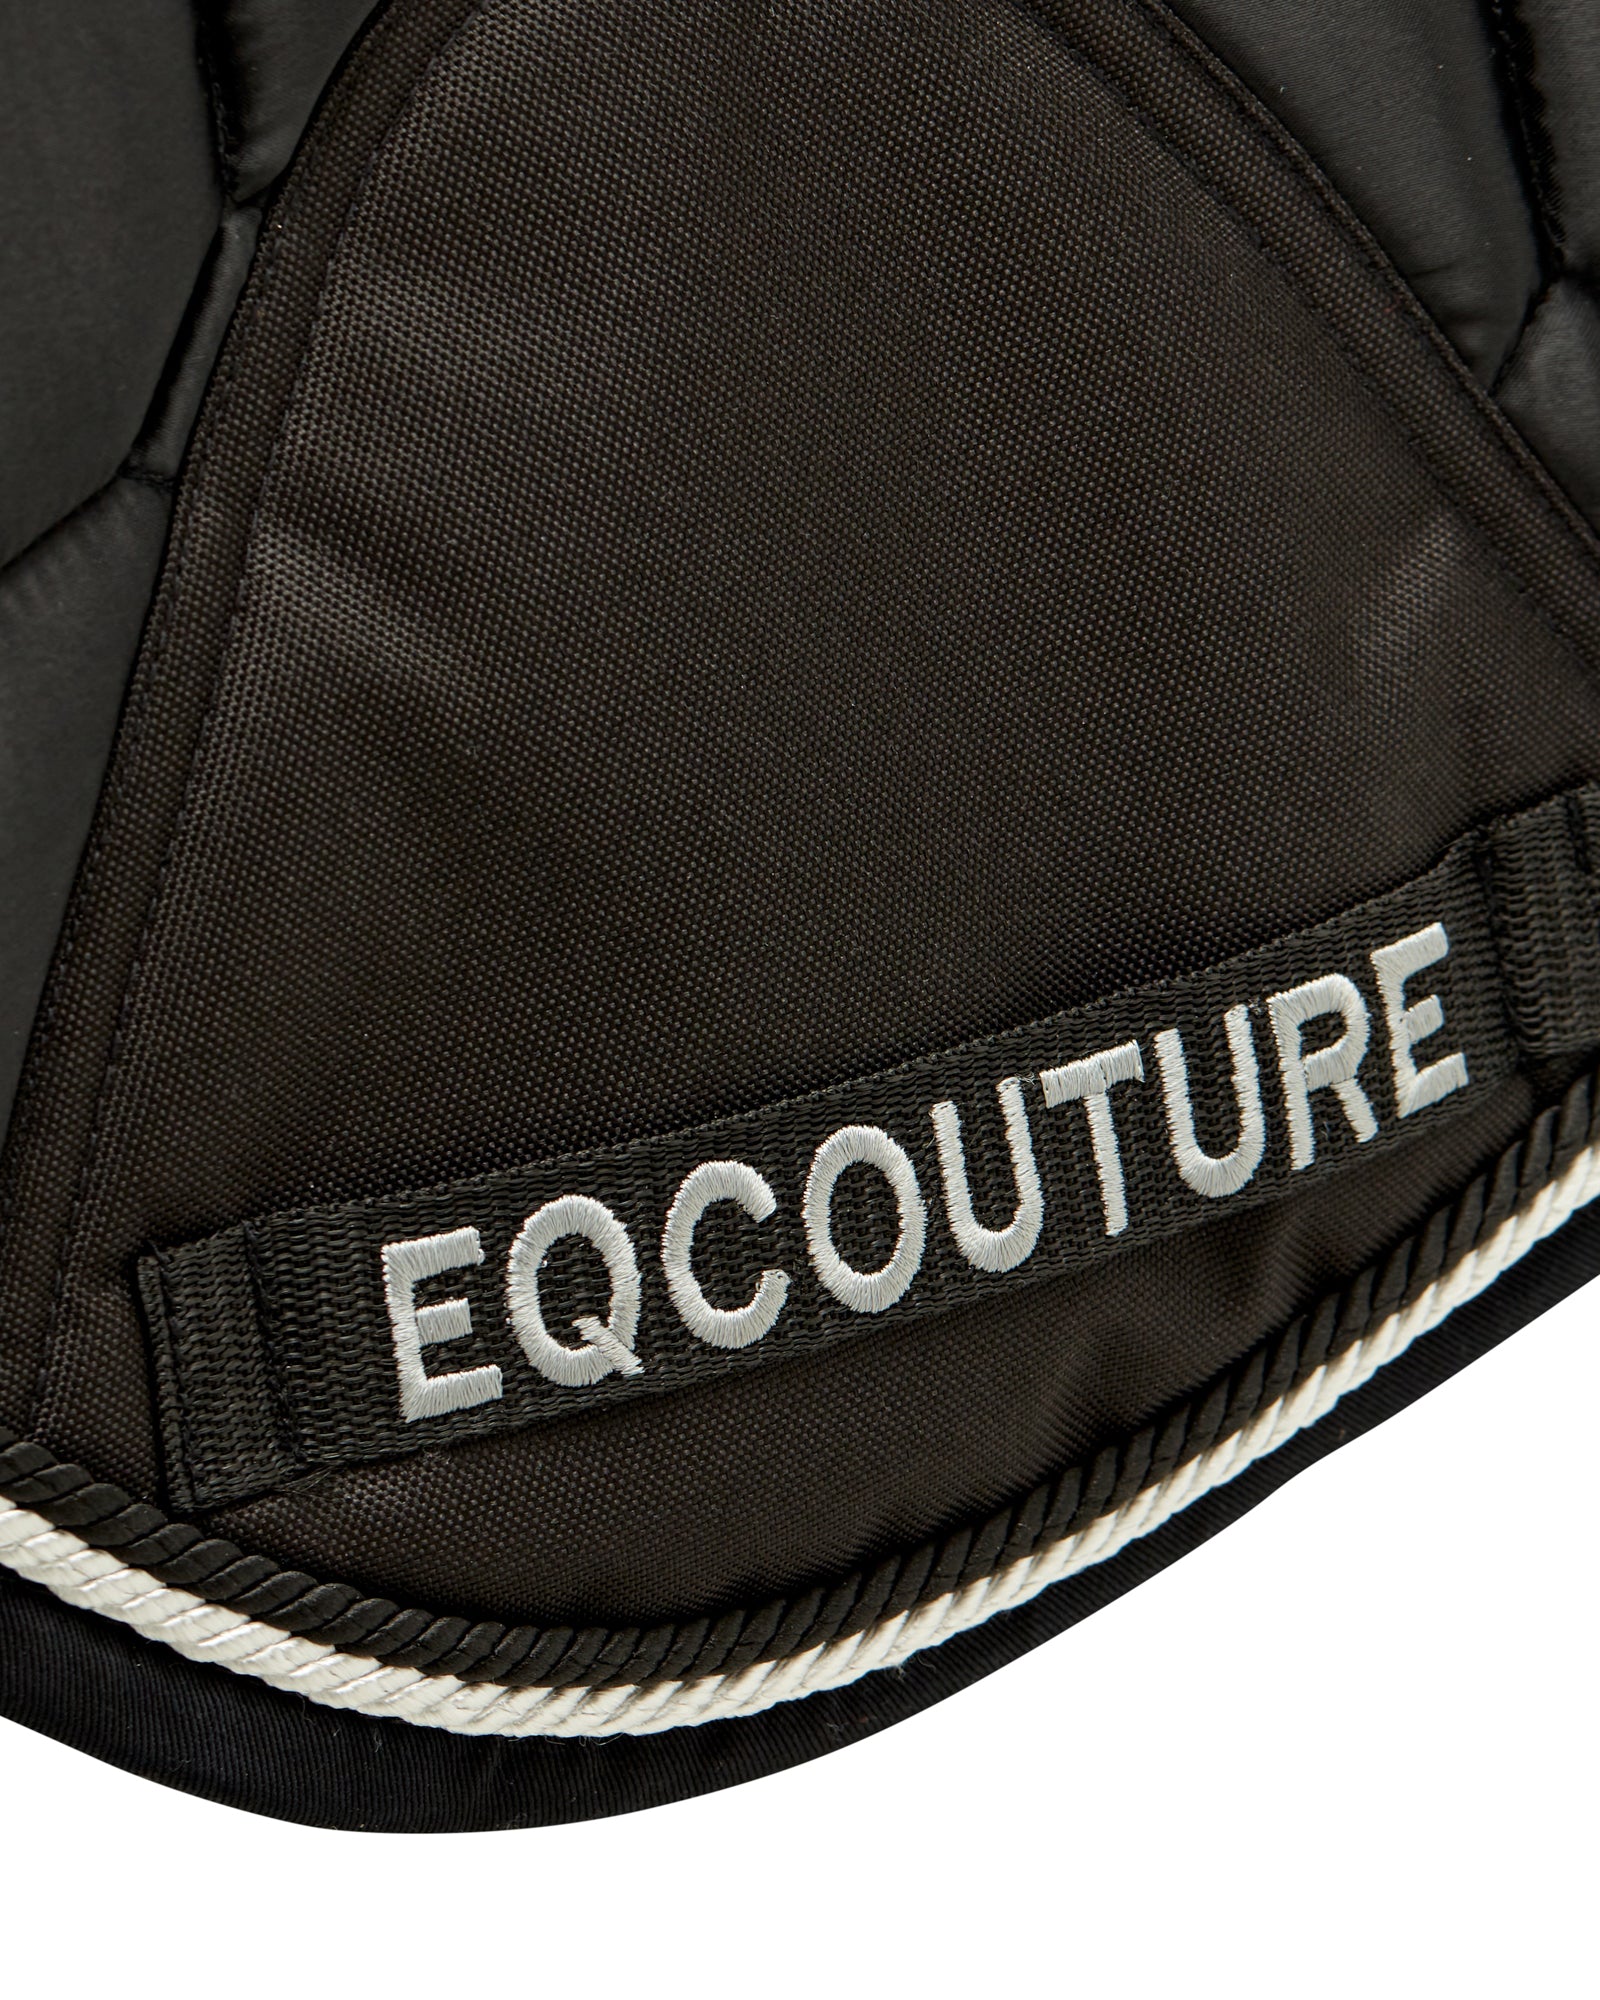 Equestrian luxury quilted black satin jumping cut saddle pads/numnahs.